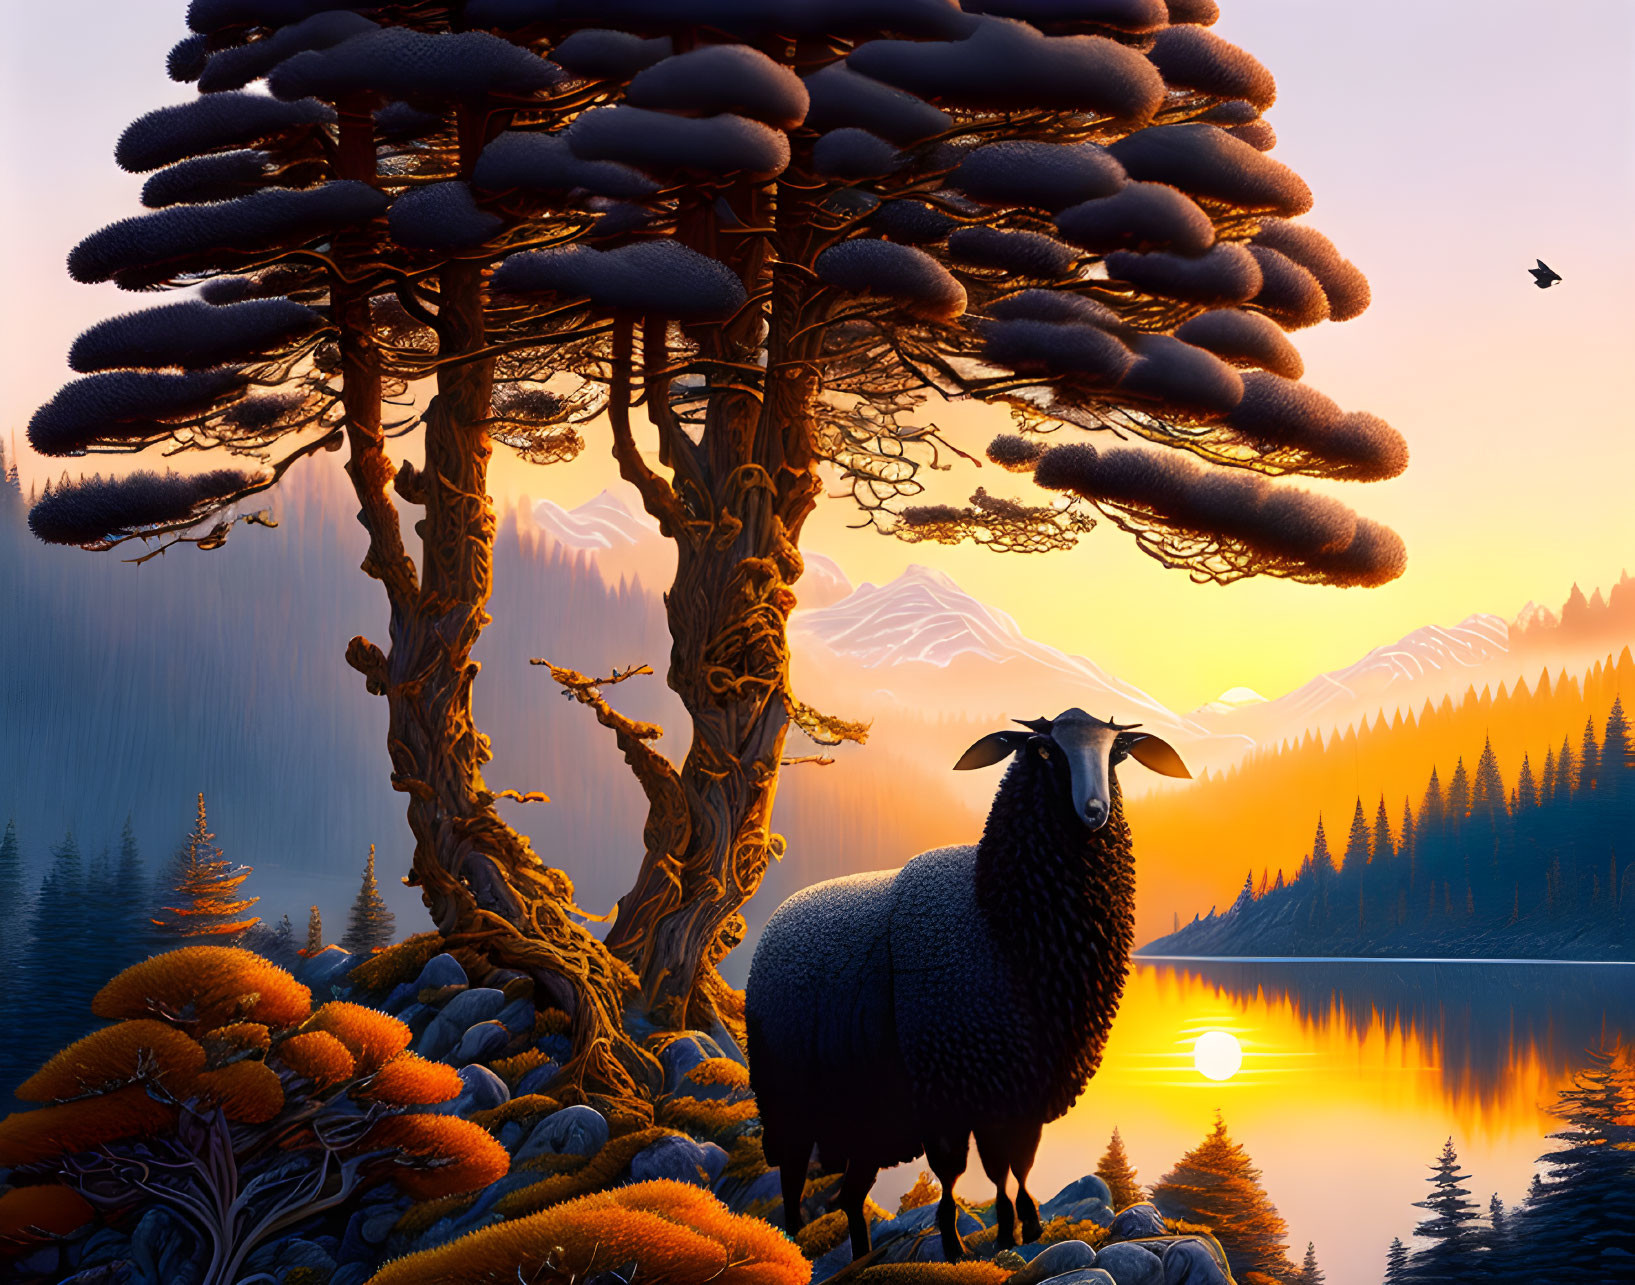 black old pine trees and sheep